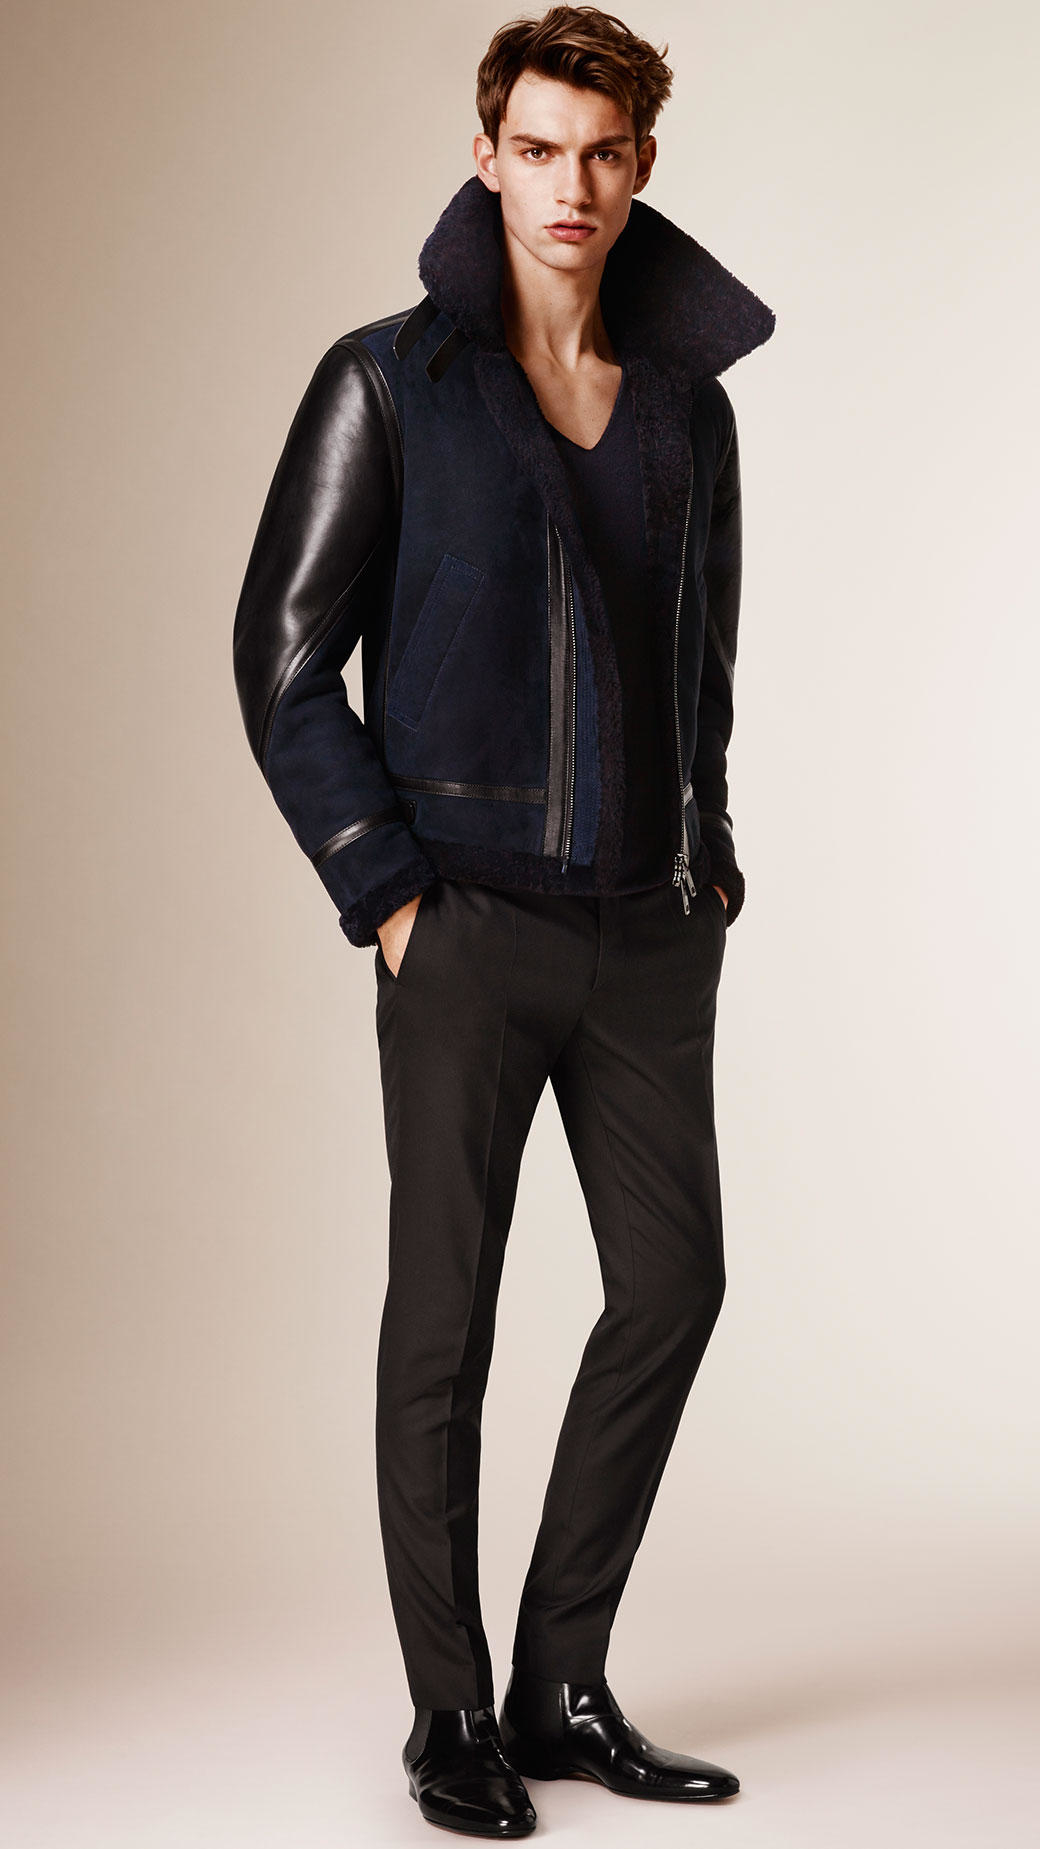 Burberry Leather Shearling Aviator Jacket in Midnight (Blue) for Men - Lyst